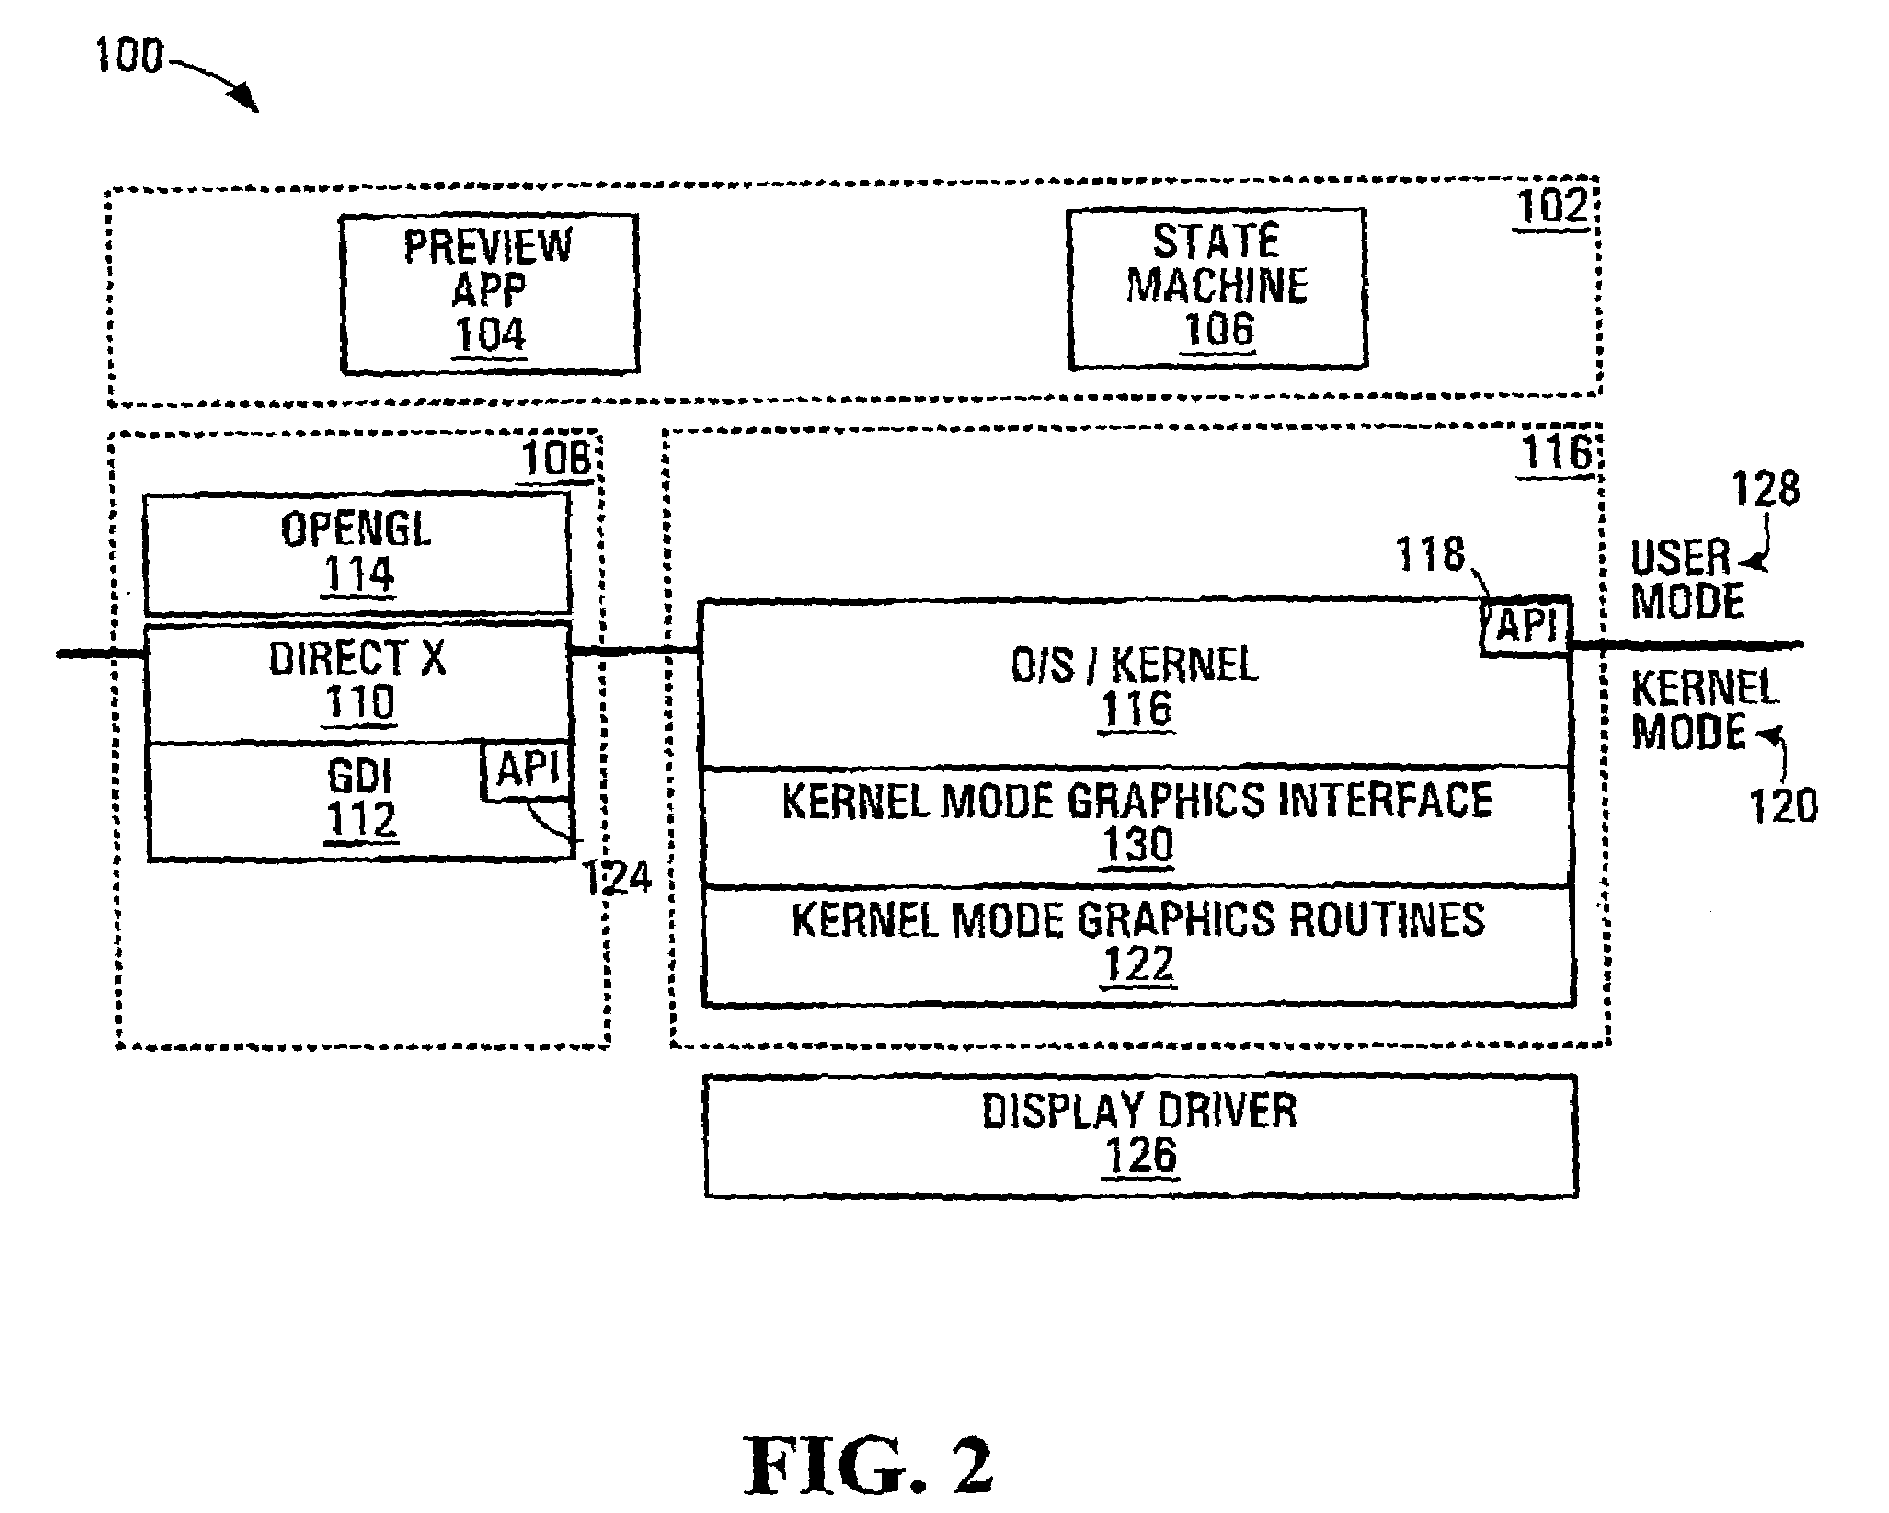 Software and methods for previewing parameter changes for a graphics display driver